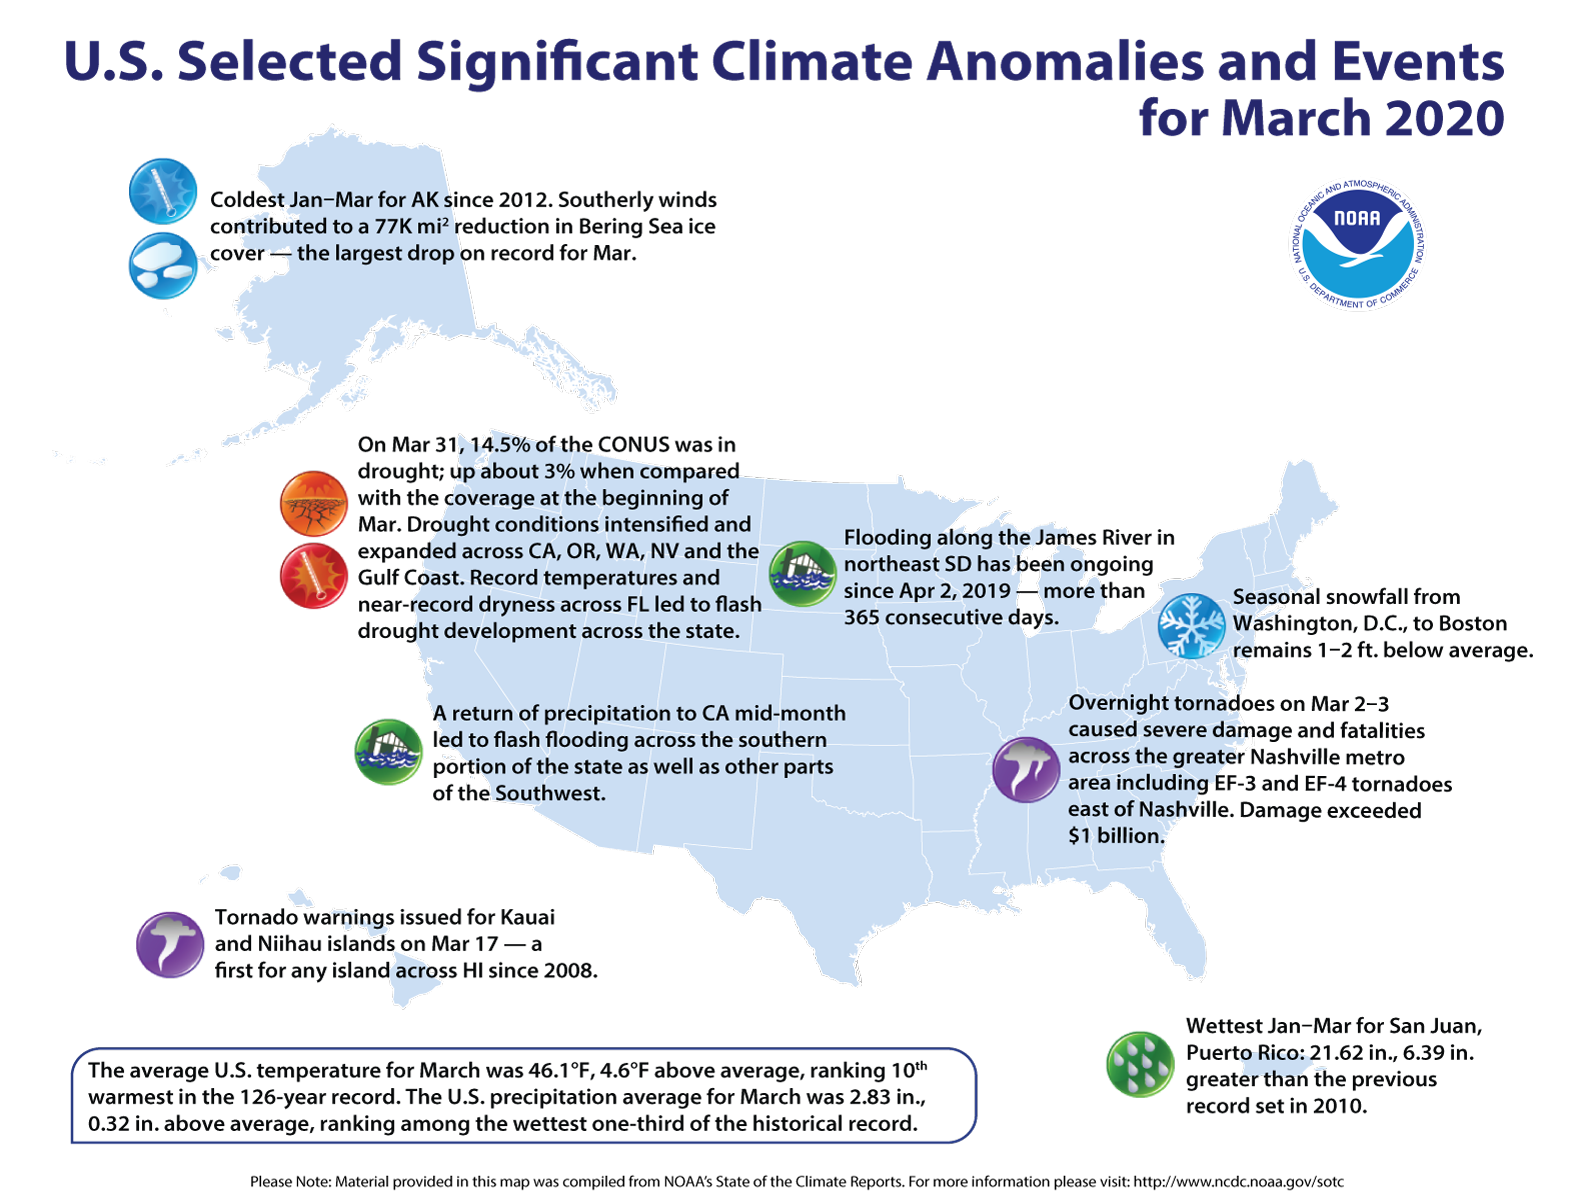 An annotated map of the United States showing notable climate and weather events that occurred across the country during March 2020. For details, please visit http://bit.ly/USClimate202003.